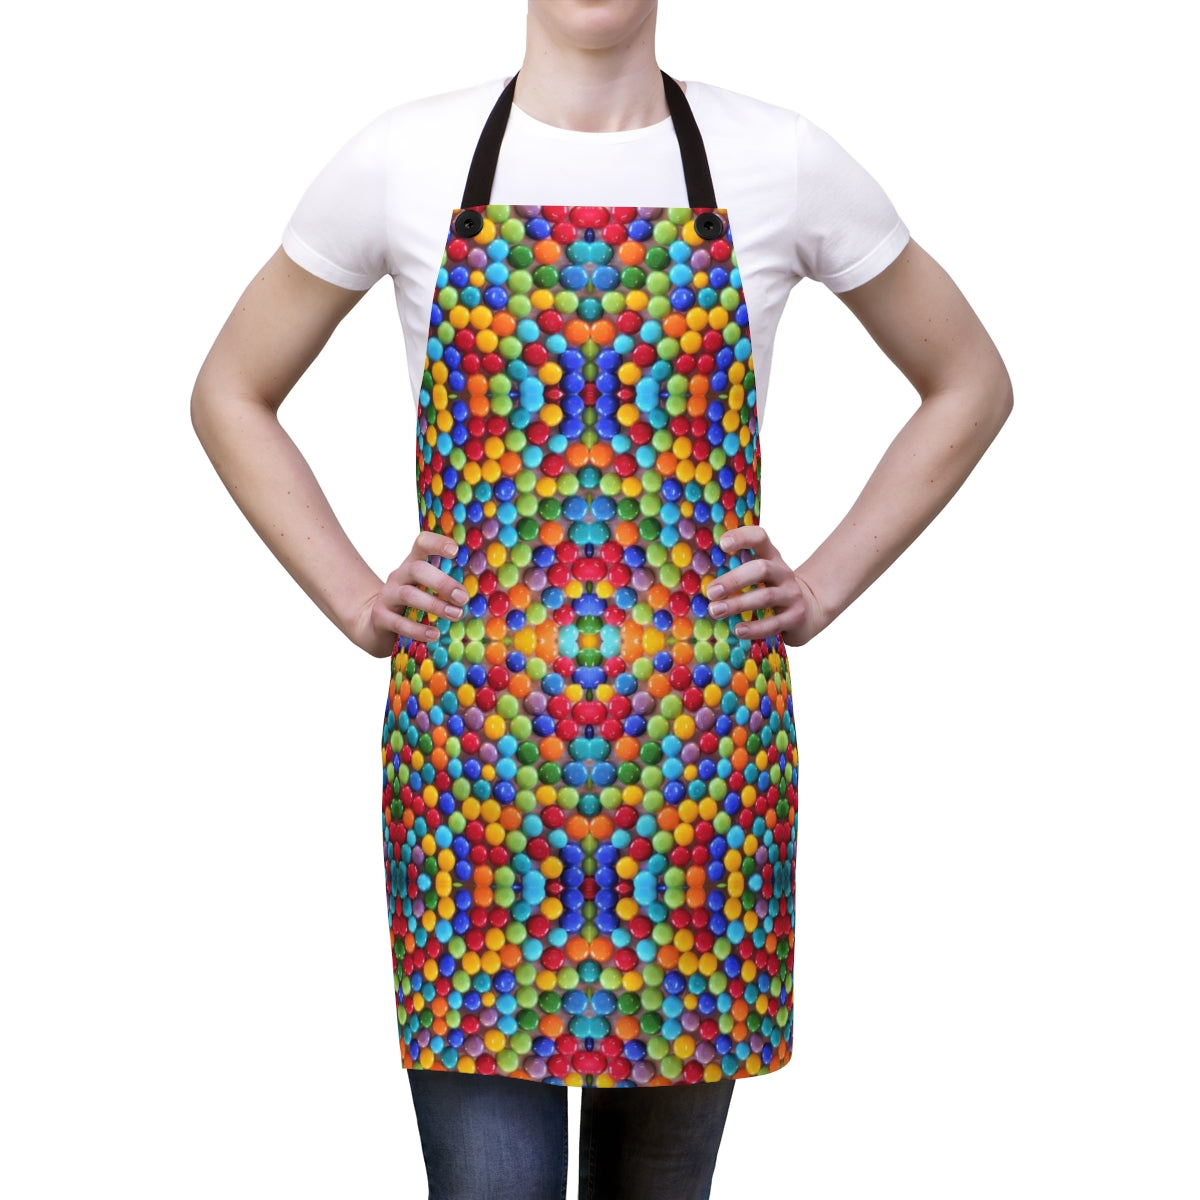 fun apron in rainbow pride colors that looks like skittles or gumballs